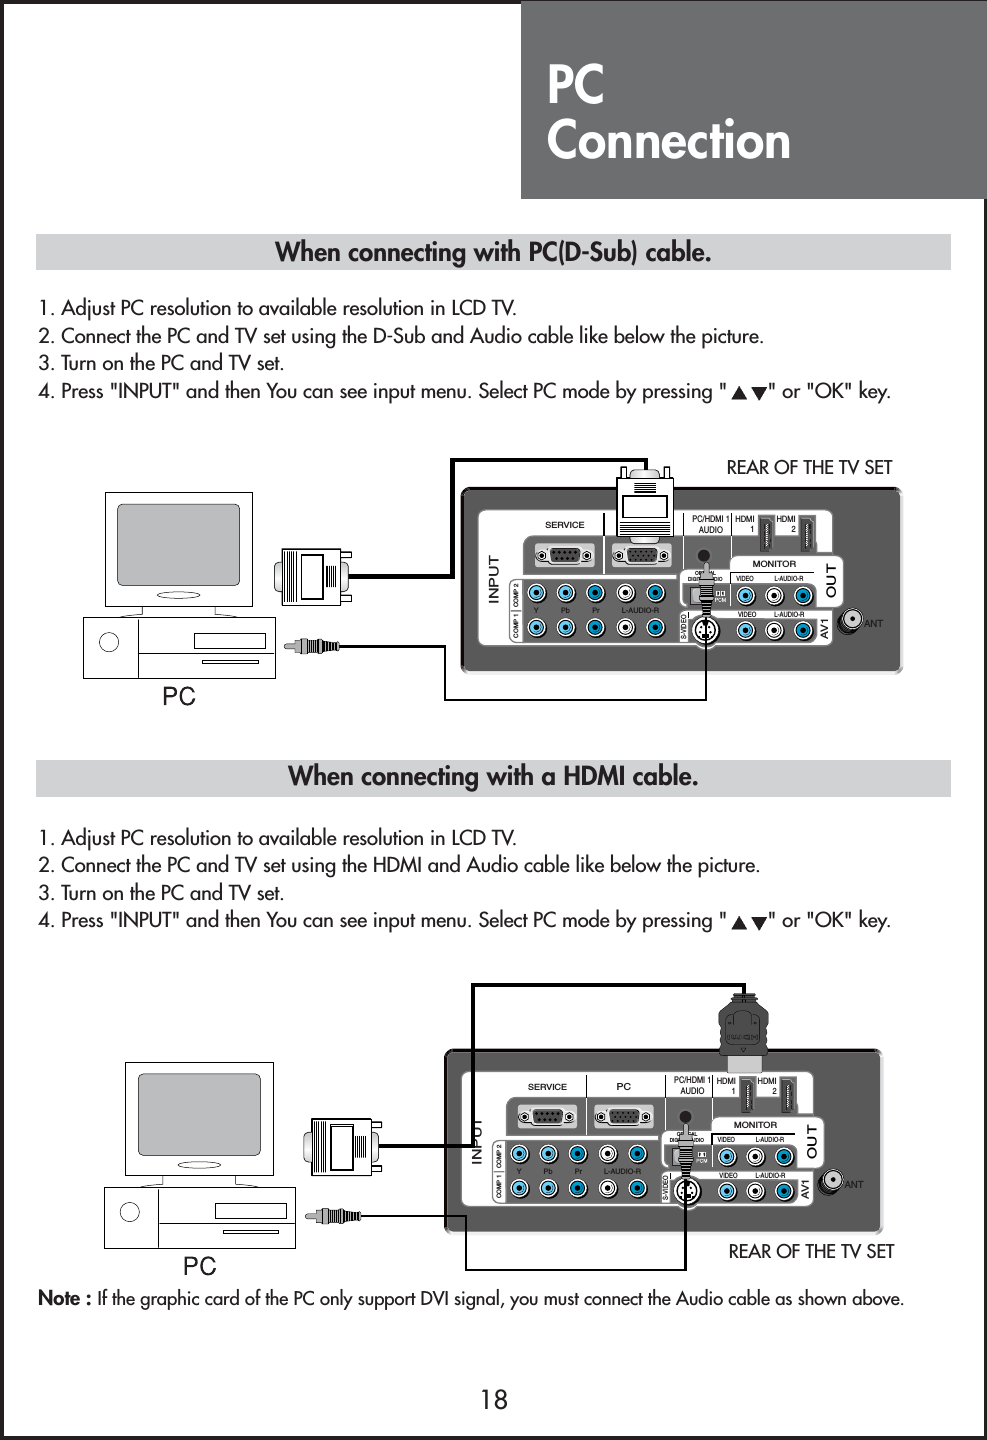 PC Connection18VIDEO           L-AUDIO-RMONITORVIDEO L-AUDIO-ROUTAV1ANTHDMI1HDMI2INPUTPCPC/HDMI 1AUDIOY           Pb           Pr           L-AUDIO-RCOMP 1 COMP 2SERVICEOPTICALDIGITAL AUDIOS-VIDEO1. Adjust PC resolution to available resolution in LCD TV.2. Connect the PC and TV set using the D-Sub and Audio cable like below the picture.3. Turn on the PC and TV set.4. Press &quot;INPUT&quot; and then You can see input menu. Select PC mode by pressing &quot; &quot; or &quot;OK&quot; key.VIDEO           L-AUDIO-RMONITORVIDEO L-AUDIO-ROUTAV1ANTHDMI1HDMI2INPUTPCPC/HDMI 1AUDIOY           Pb           Pr           L-AUDIO-RCOMP 1 COMP 2SERVICEOPTICALDIGITAL AUDIOS-VIDEO1. Adjust PC resolution to available resolution in LCD TV.2. Connect the PC and TV set using the HDMI and Audio cable like below the picture.3. Turn on the PC and TV set.4. Press &quot;INPUT&quot; and then You can see input menu. Select PC mode by pressing &quot; &quot; or &quot;OK&quot; key.REAR OF THE TV SETREAR OF THE TV SETWhen connecting with PC(D-Sub) cable.When connecting with a HDMI cable.Note : If the graphic card of the PC only support DVI signal, you must connect the Audio cable as shown above.